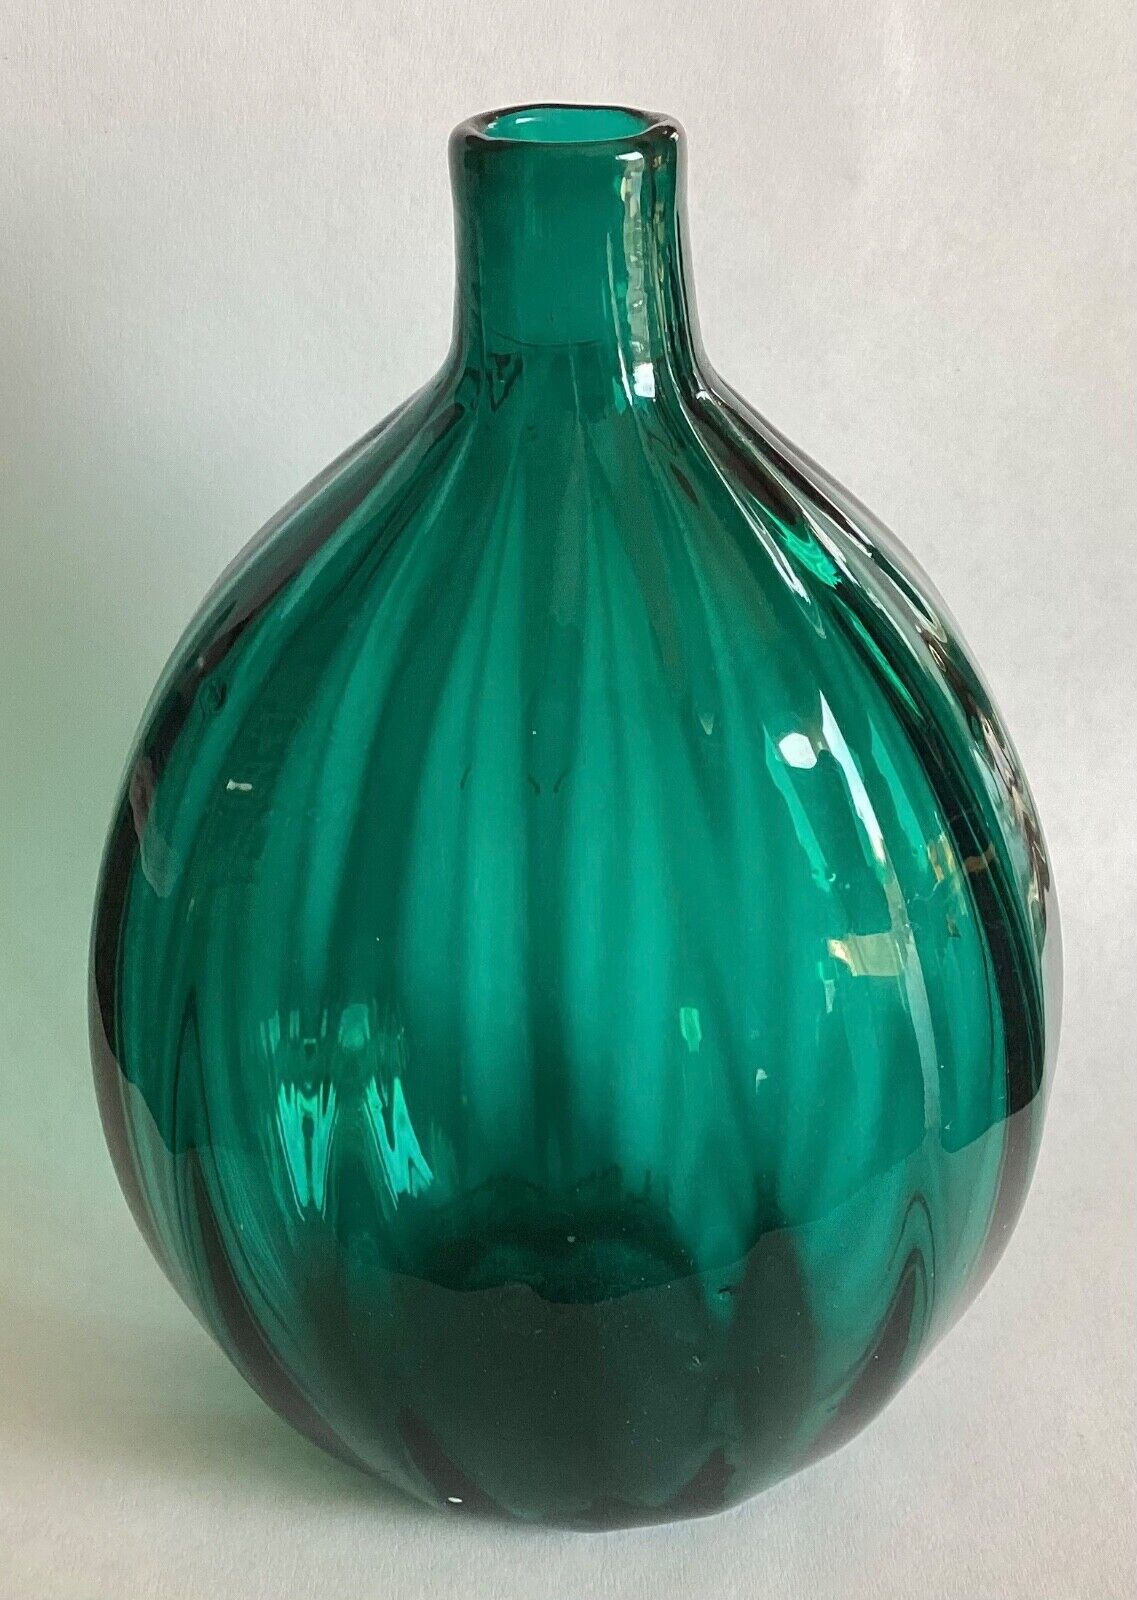 Vintage Teal Green Paneled Hand Blown Glass Stiegel Type Flask Pairpoint or ?